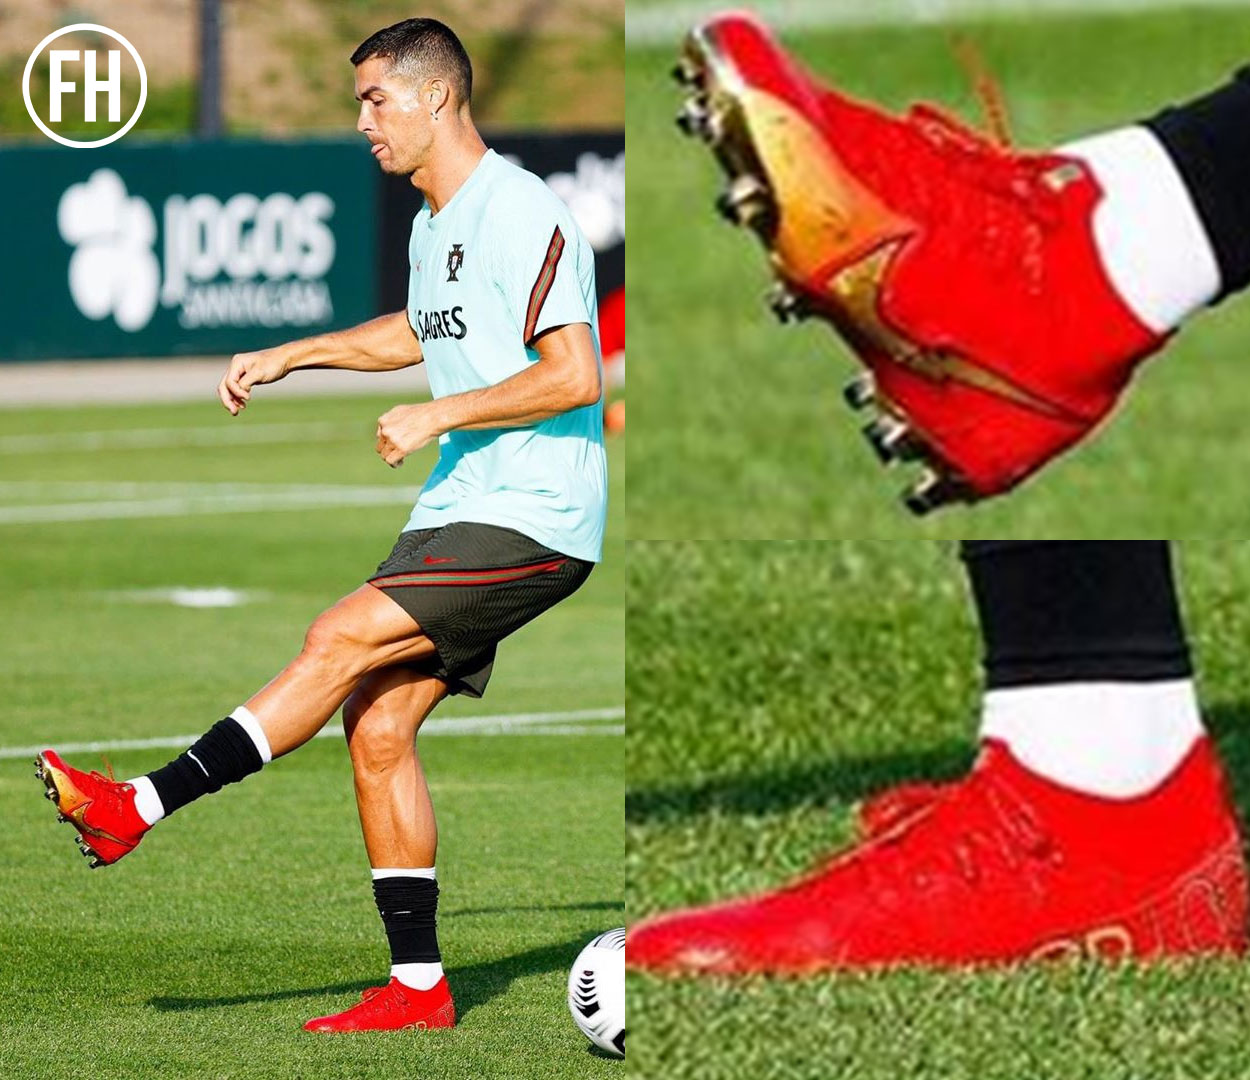 Nike Mercurial Superfly CR7 100 Goals Boots Revealed - Debut Against ...